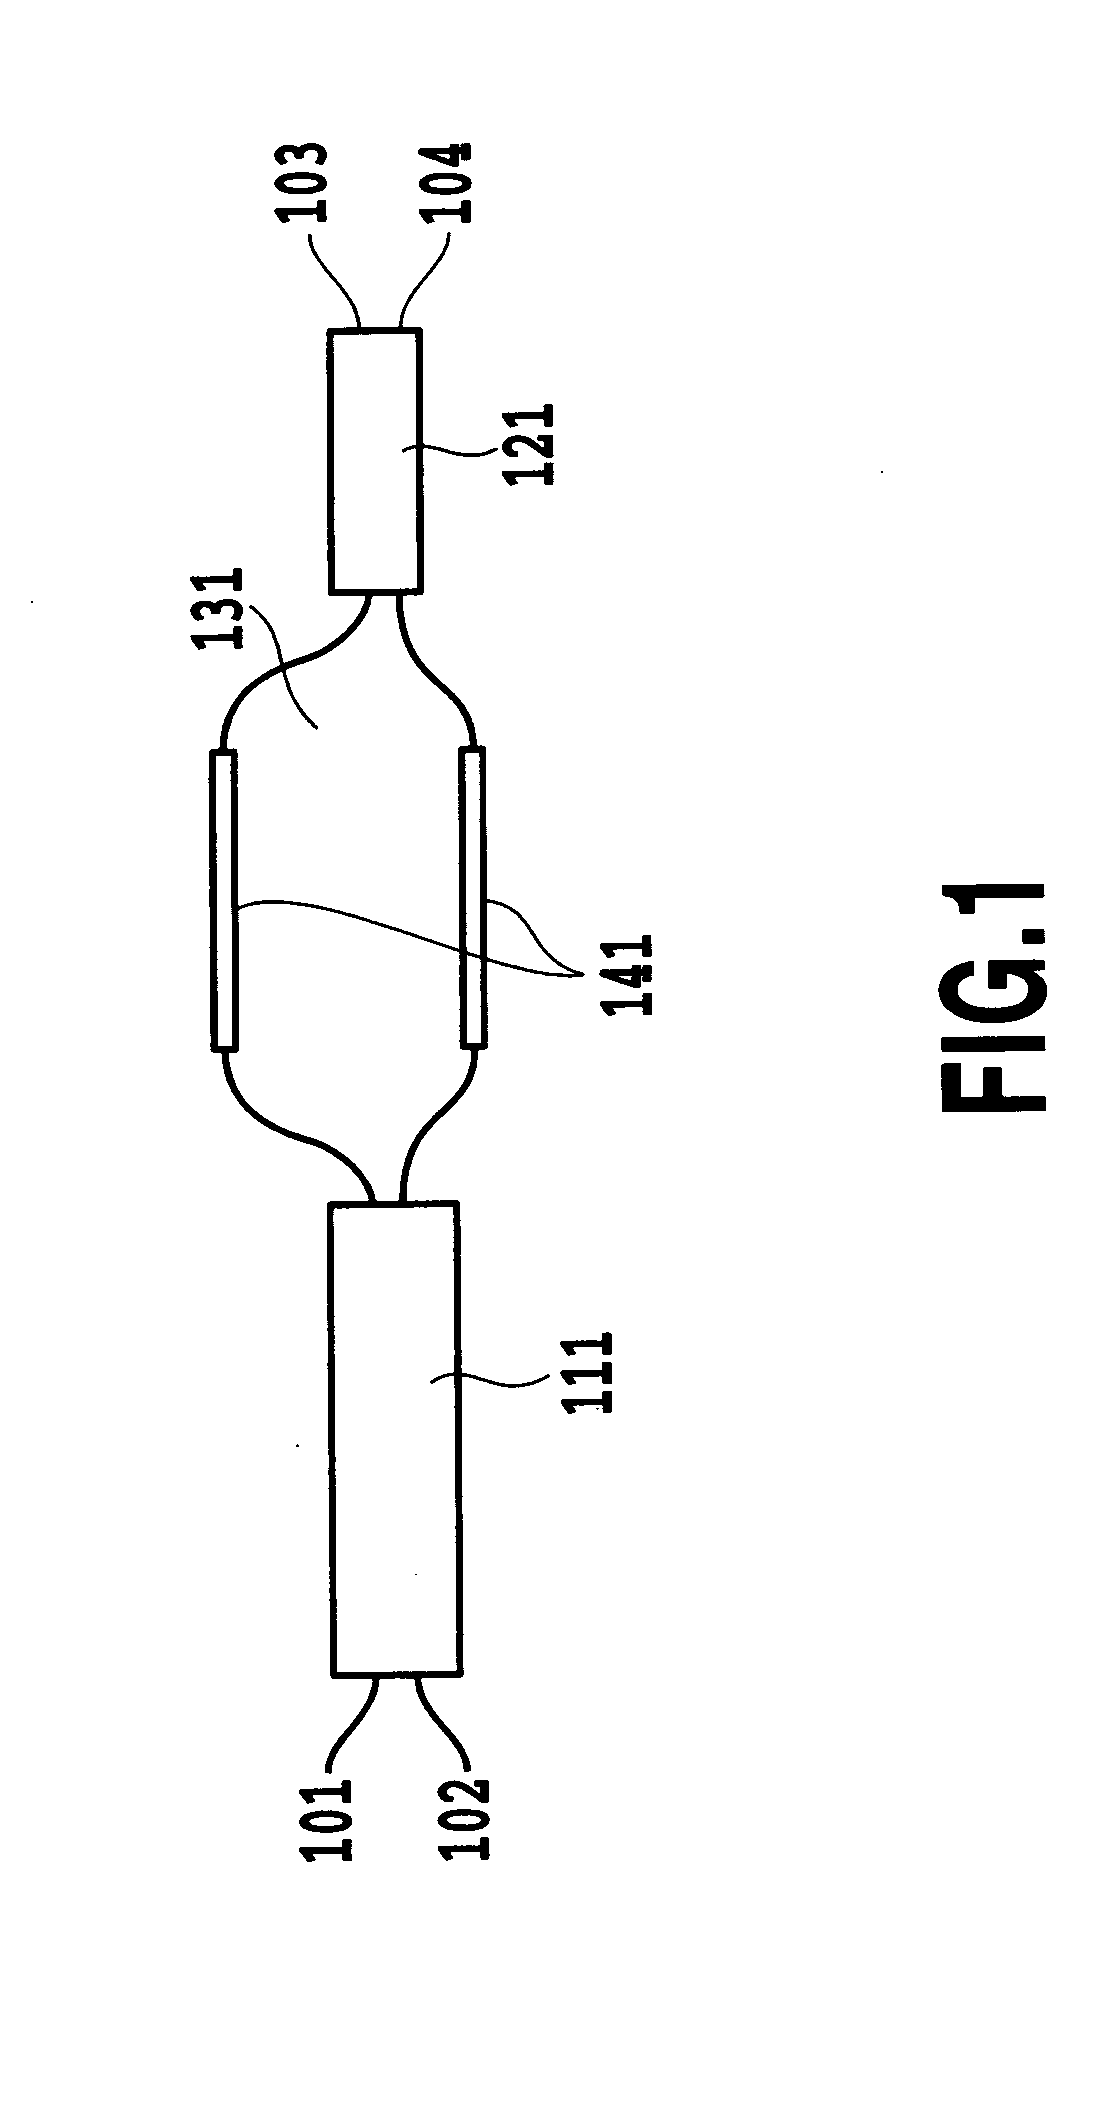 Interference optical switch and variable optical attenuator